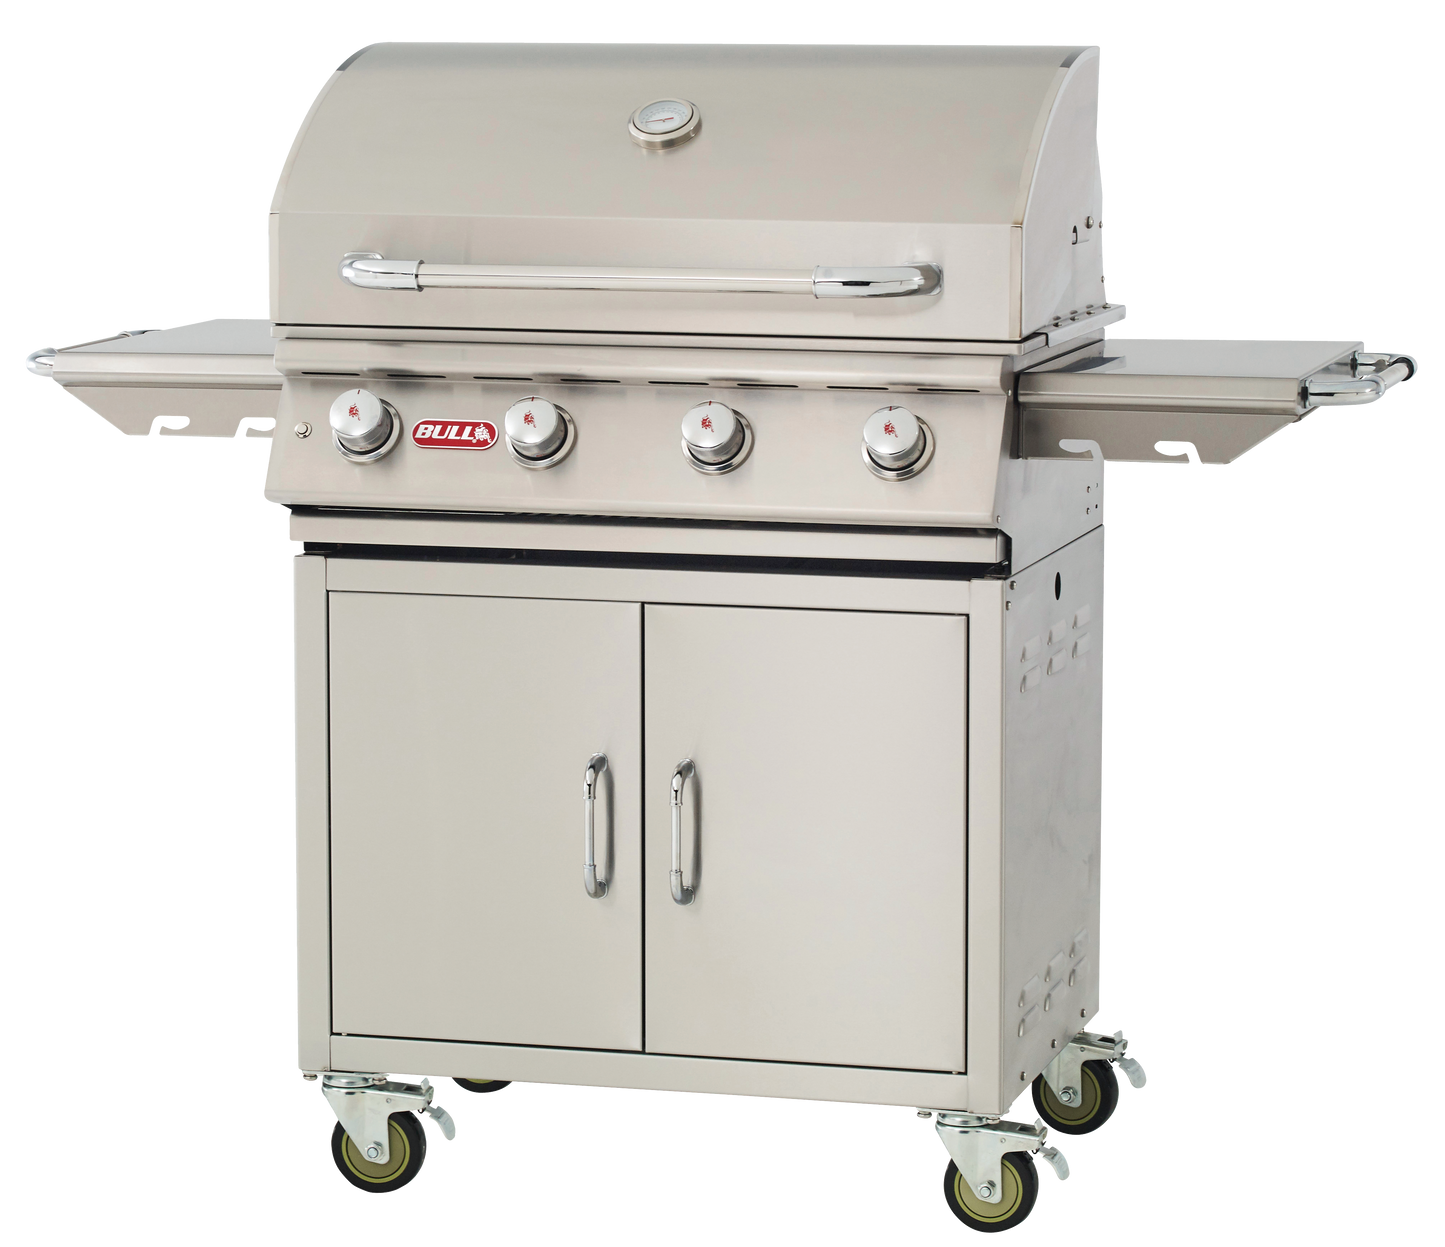 Bull Lonestar Select 30 Inch Natural Gas Grill on Cart